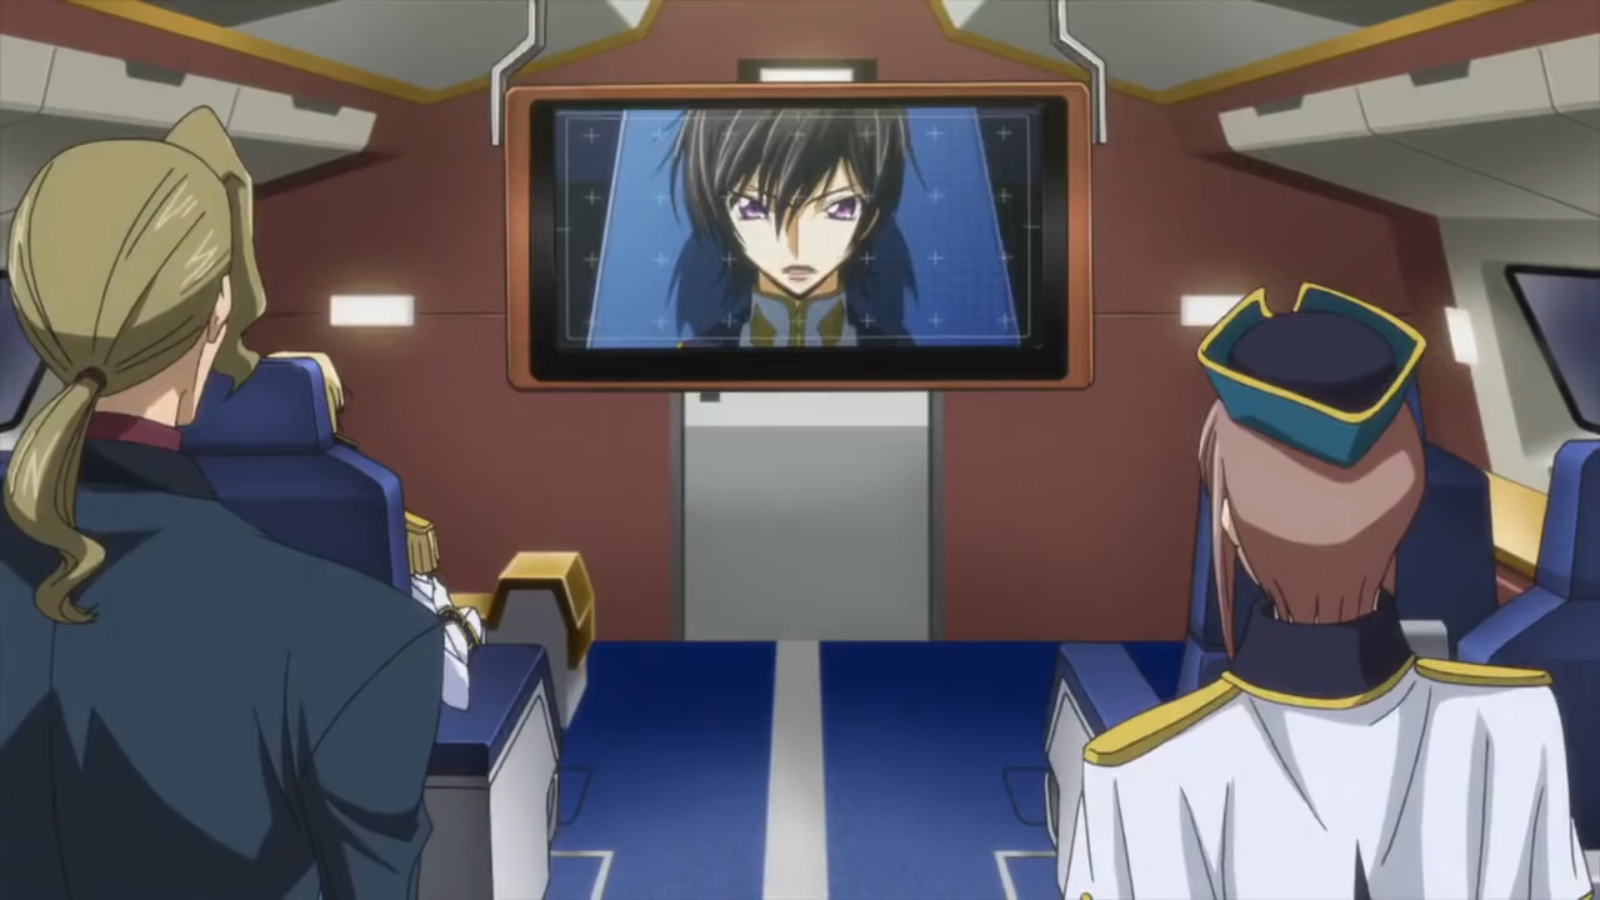 Lelouch Lamperouge, a Britannian high schooler at Ashford Academy is the show's protagonist